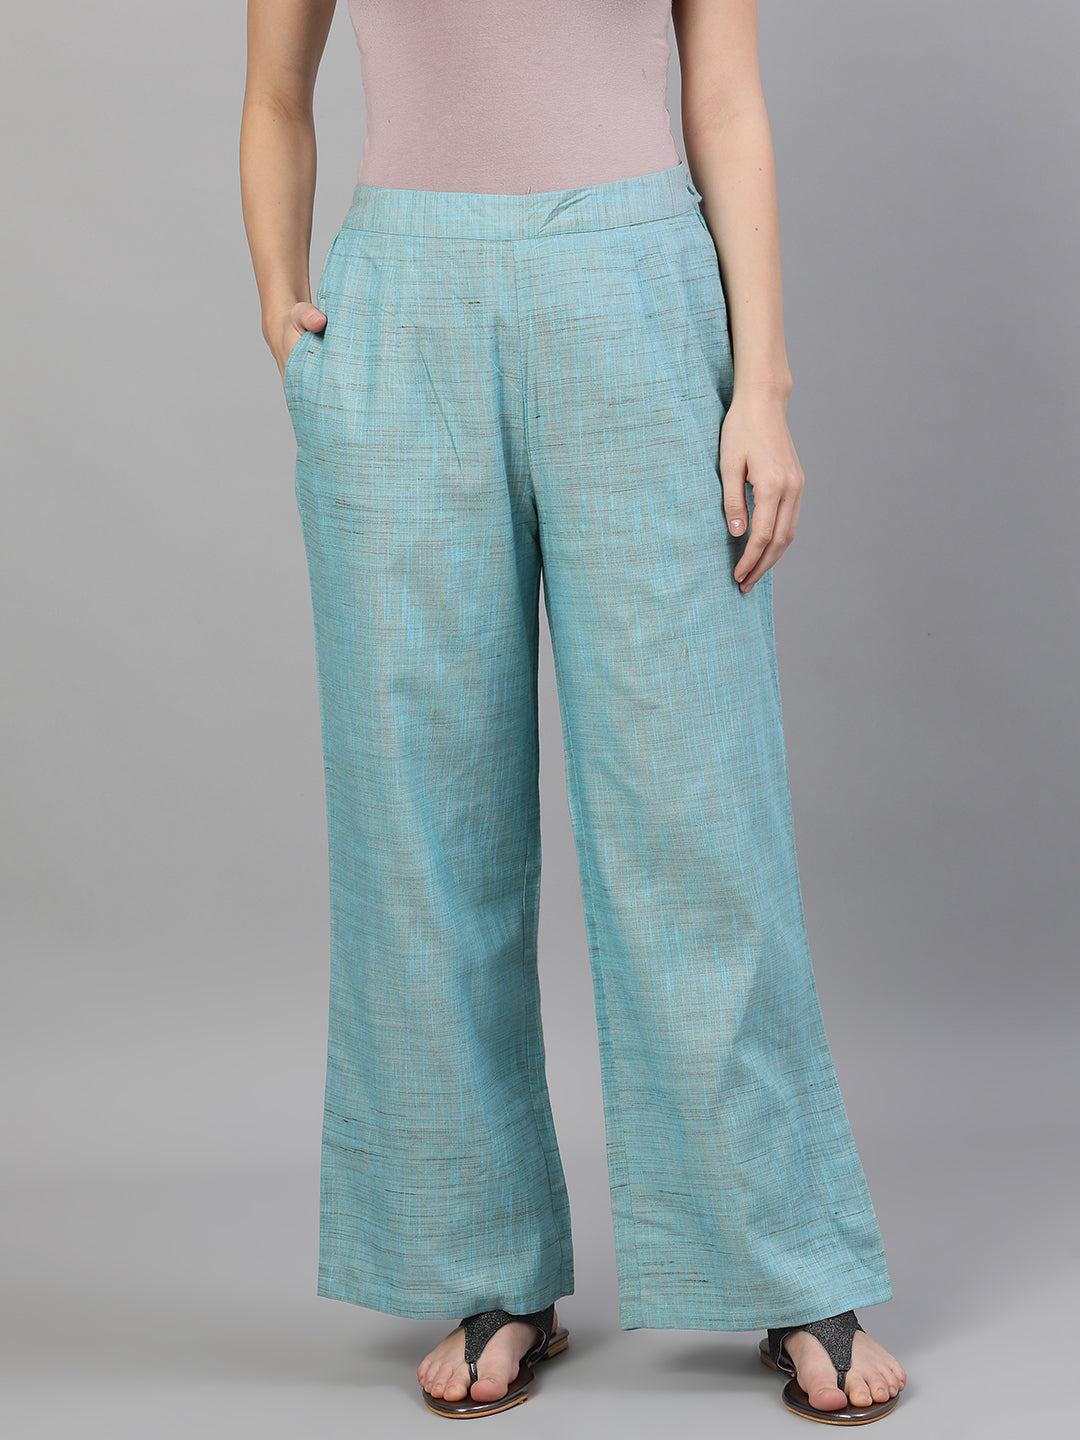 Women's Blue Textured Relaxed Fit Palazzo - Aks